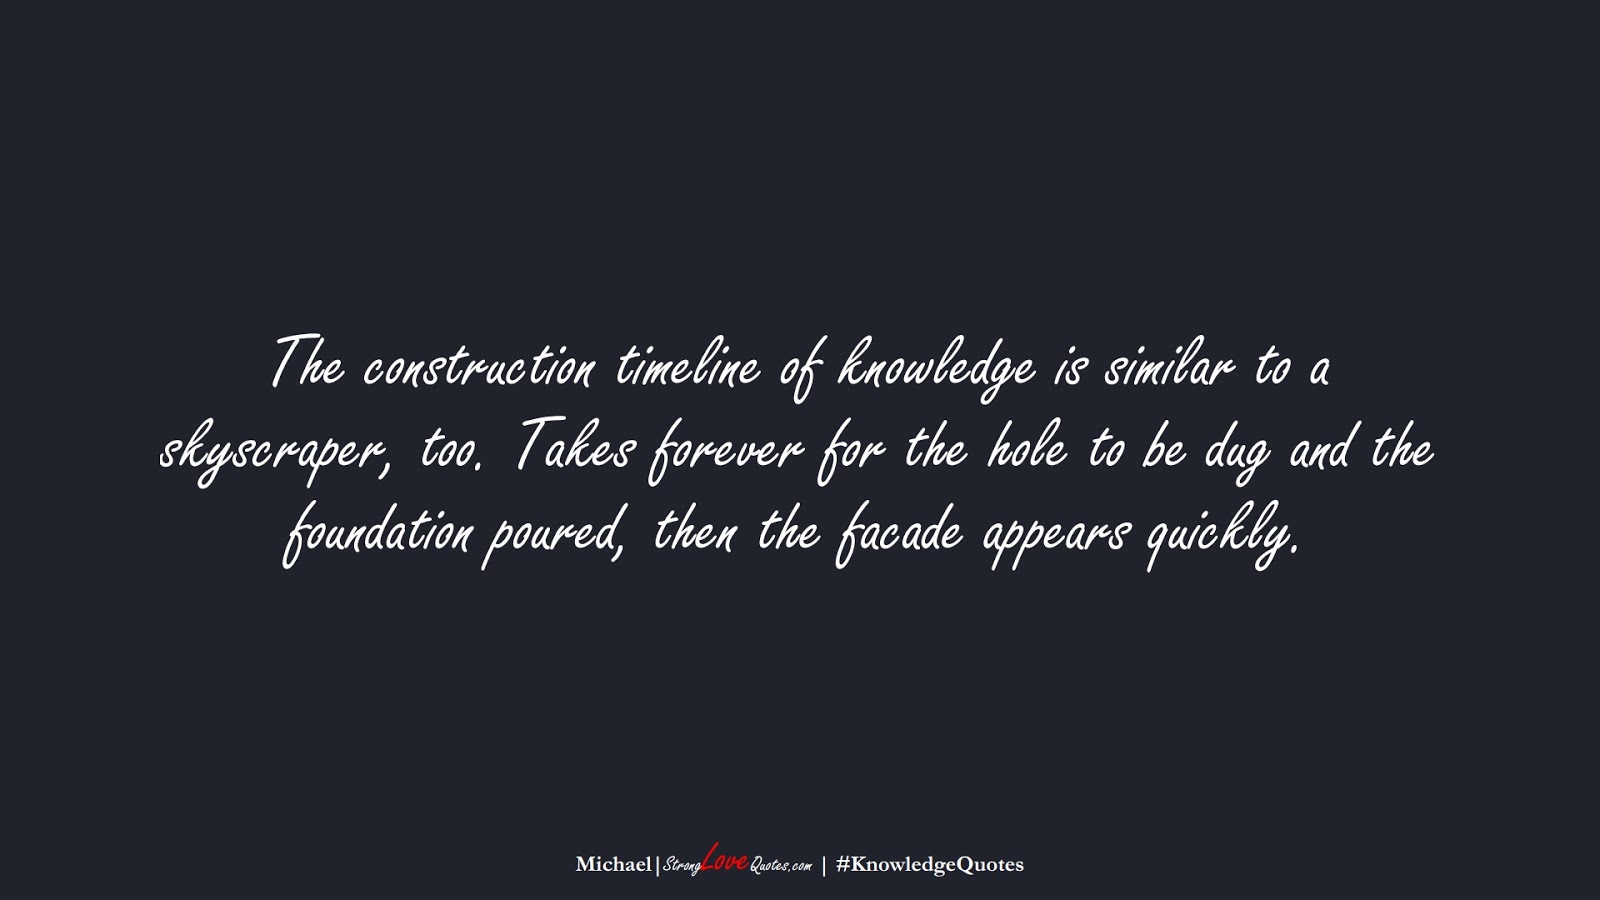 The construction timeline of knowledge is similar to a skyscraper, too. Takes forever for the hole to be dug and the foundation poured, then the facade appears quickly. (Michael);  #KnowledgeQuotes